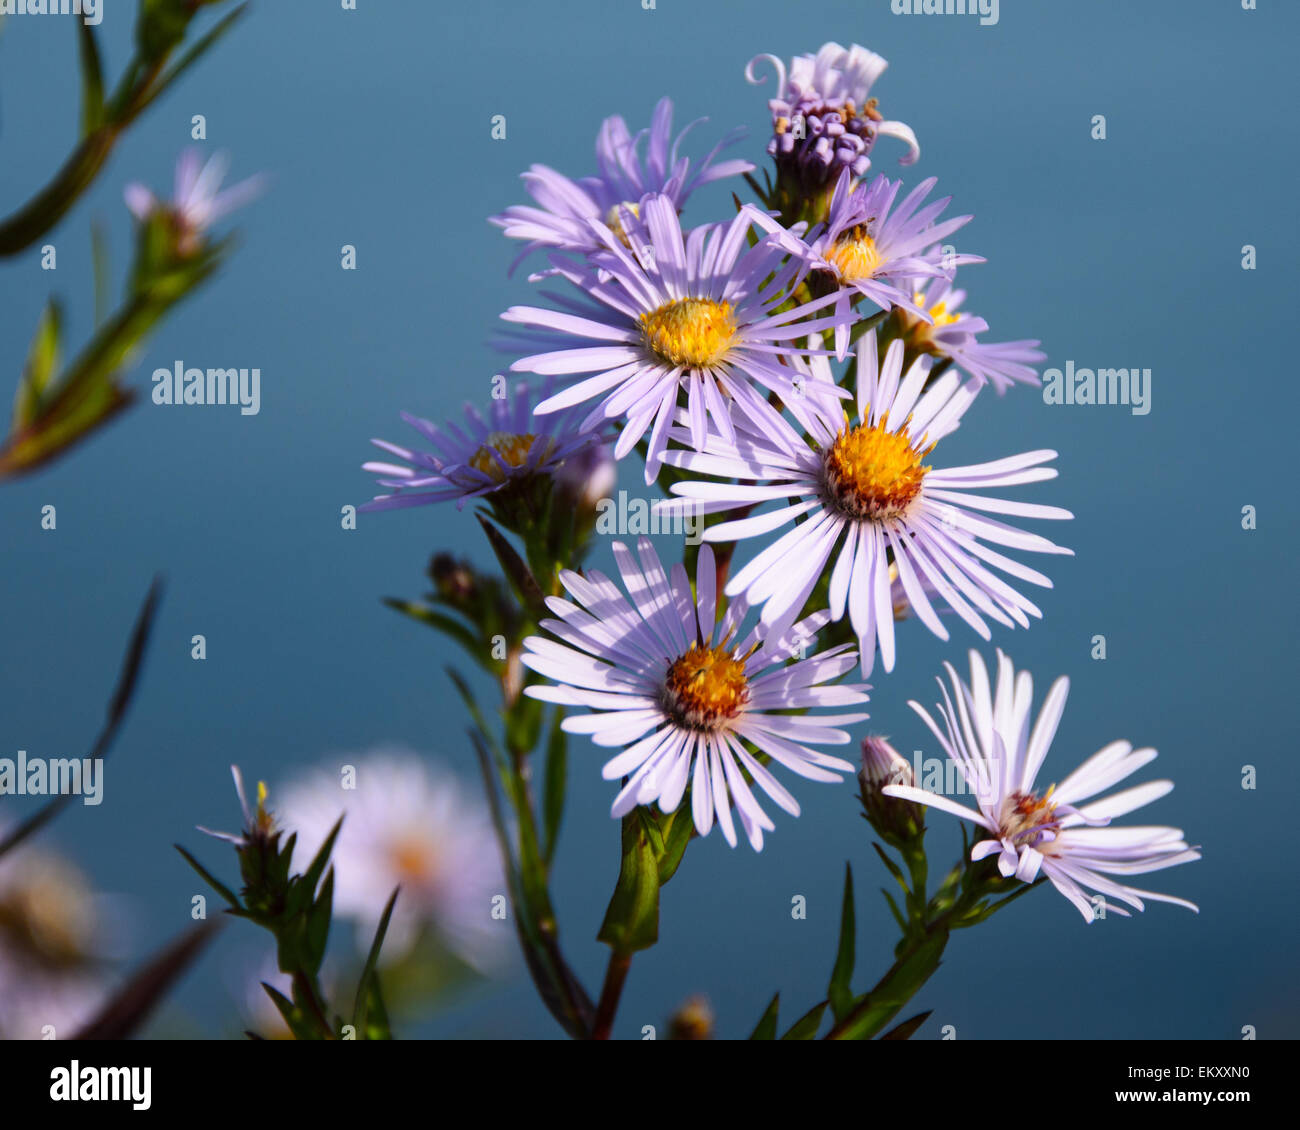 Purple flowers of the New England Aster (Symphyotrichum novae-angliae). Stock Photo